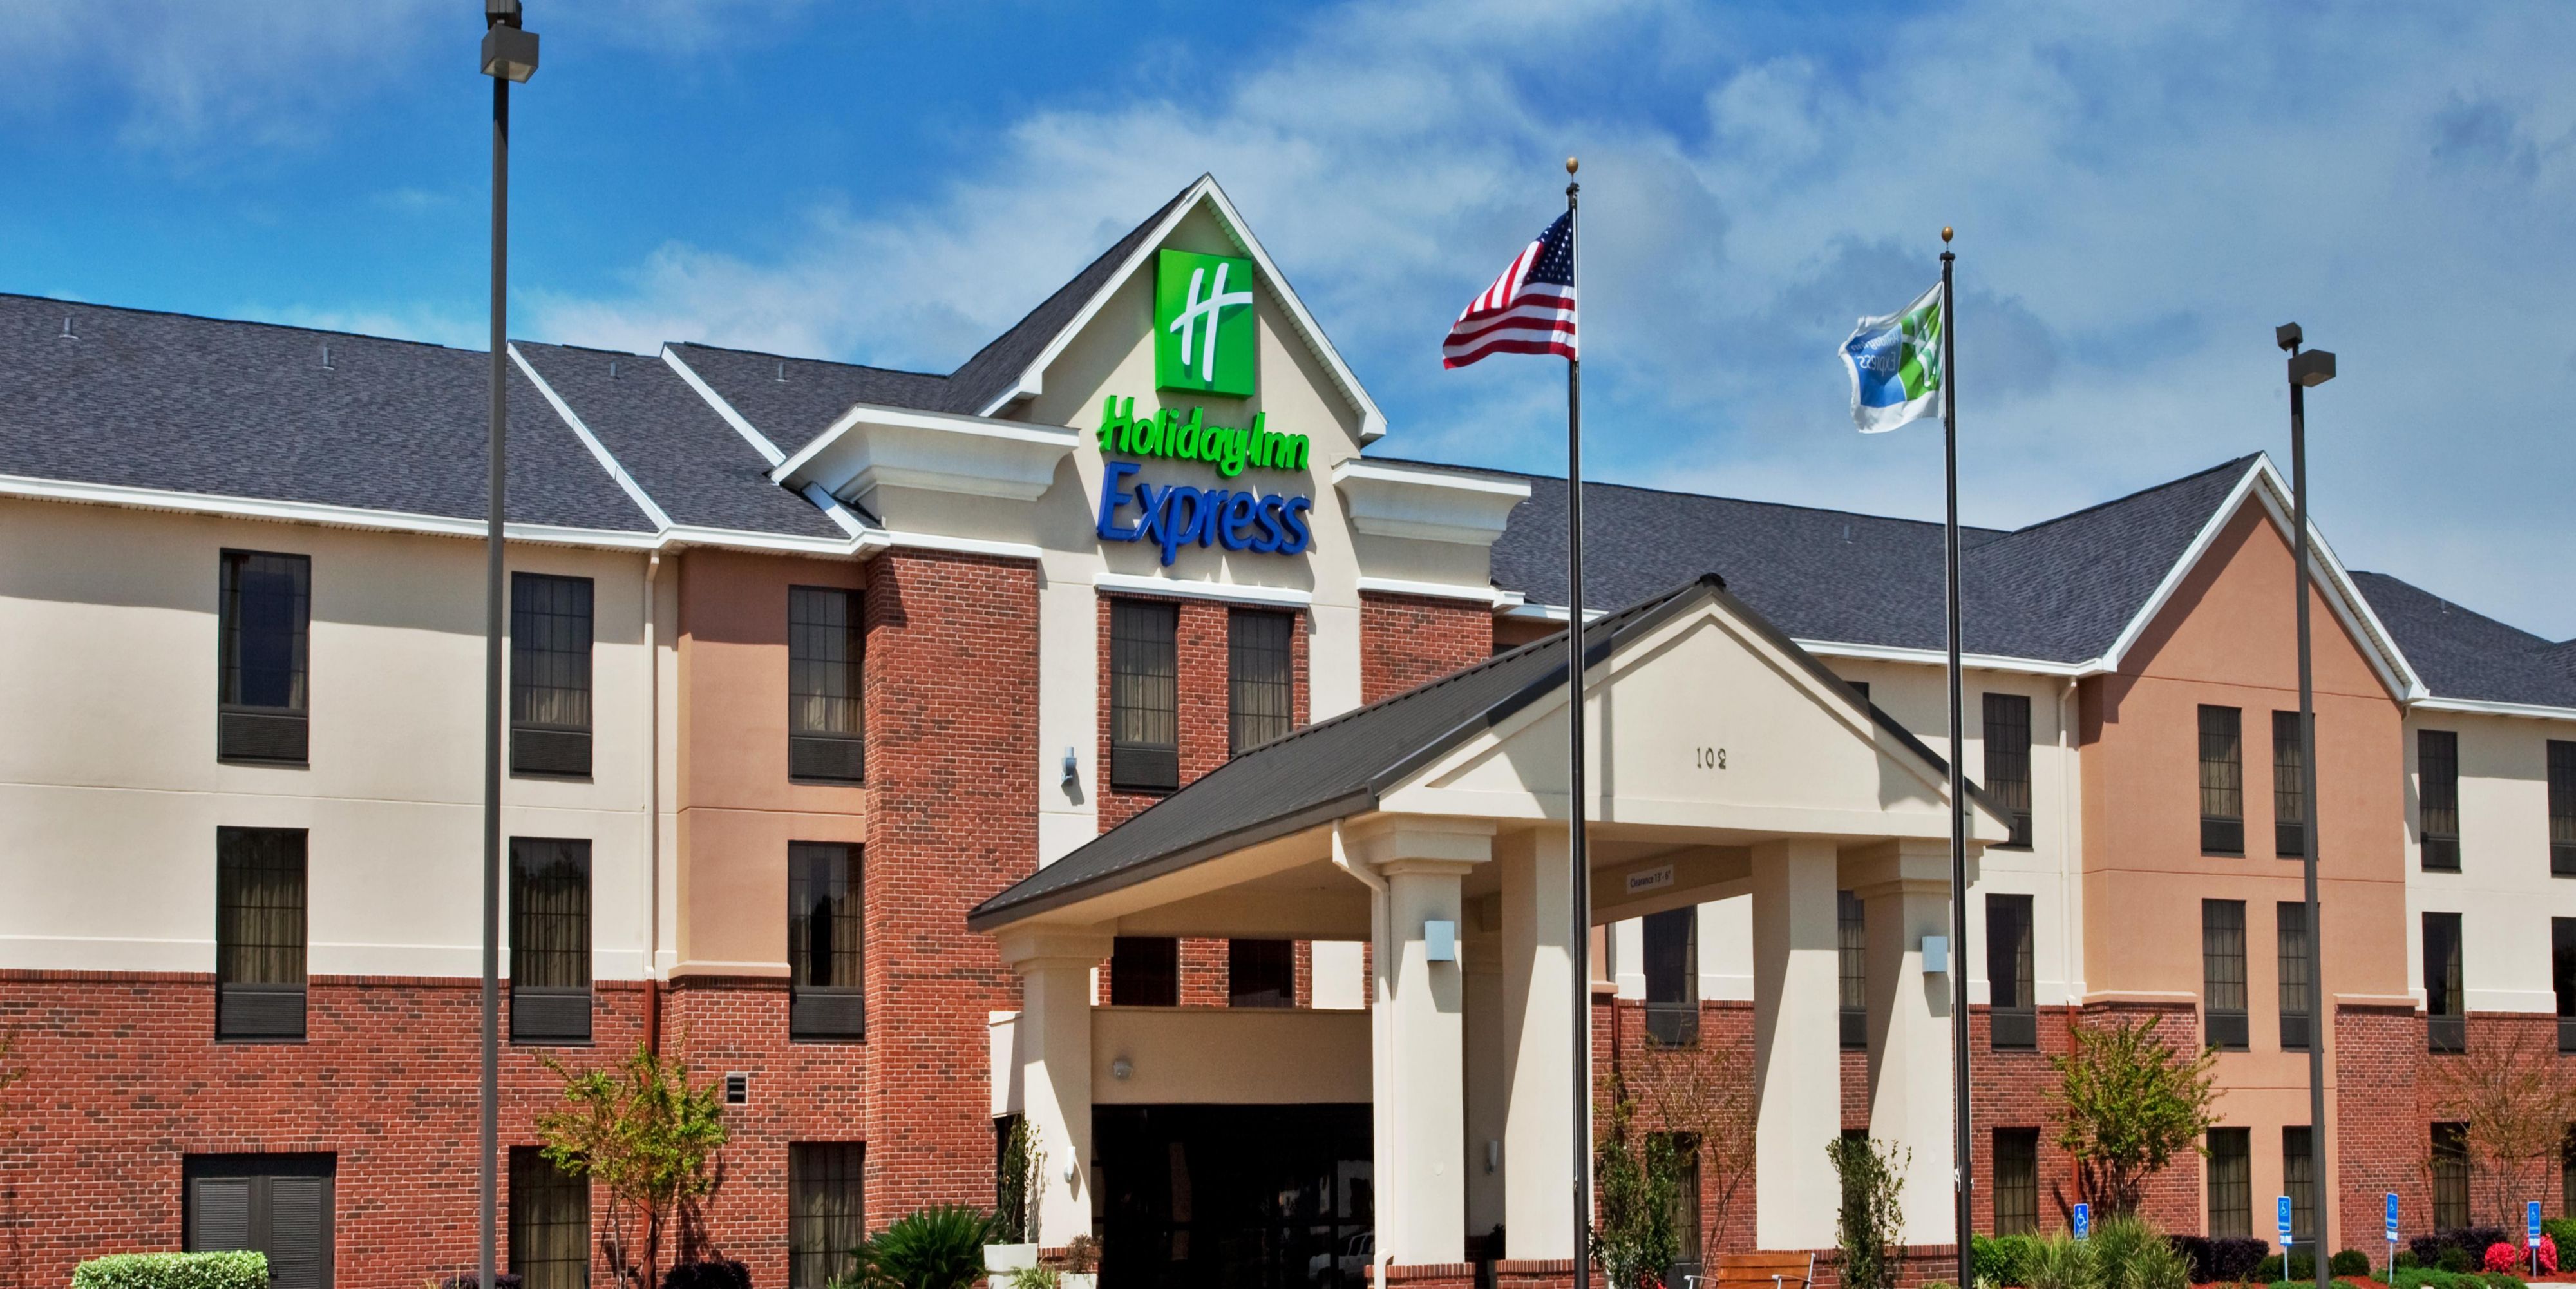 When you stay with us near Lake Charles, your comfort is our top concern. Our recent renovations provide all the conveniences of home. Our modern amenities add to your enjoyment and relaxation. We pride ourselves on catering our service to meet your needs, and our full-service staff goes the extra mile to make you smile. 
